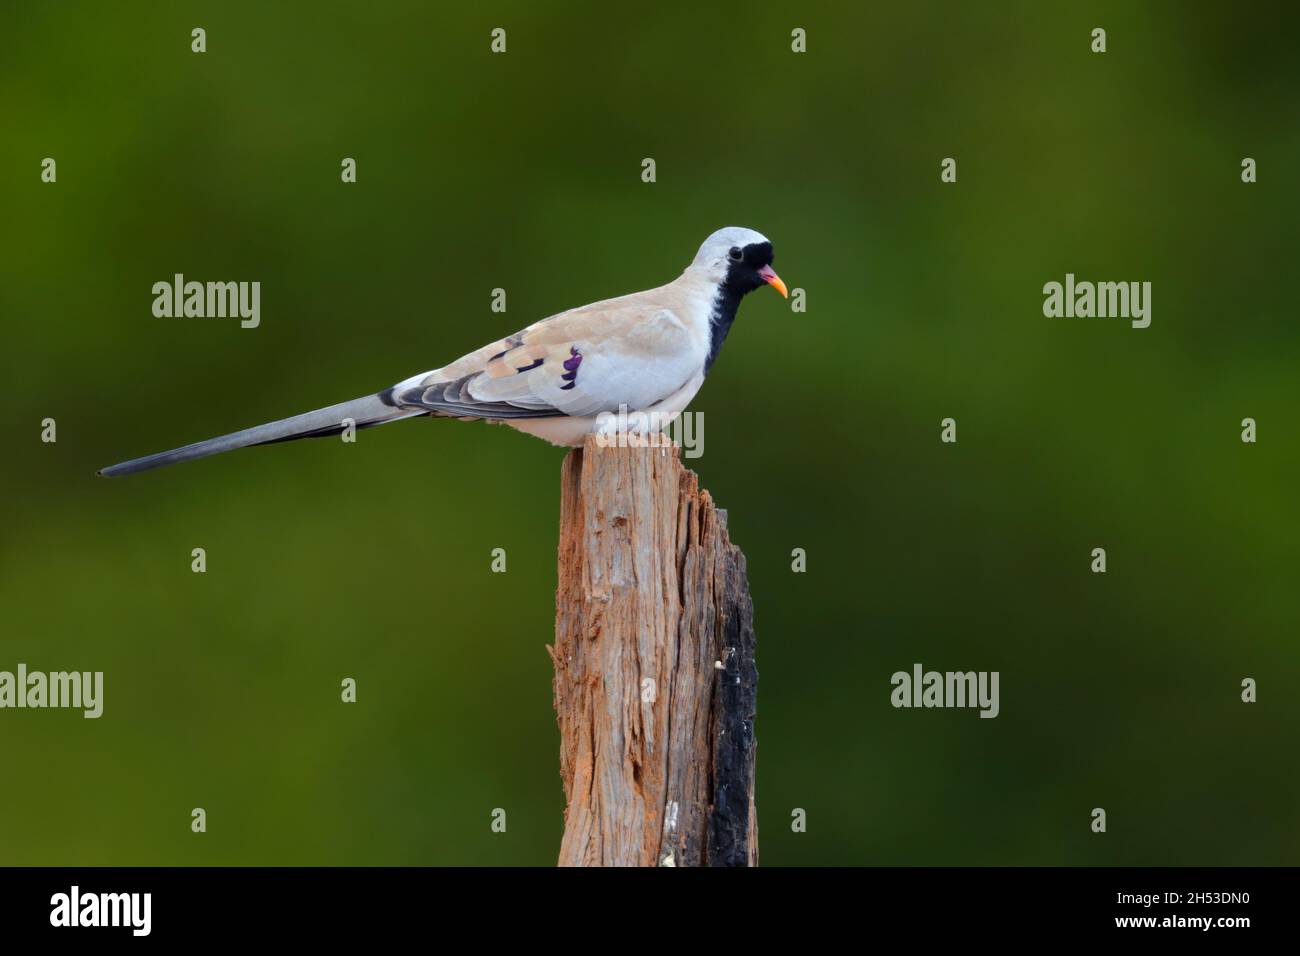 An adult male Namaqua dove (Oena capensis) perched on a stump in the Gambia, West Africa Stock Photo